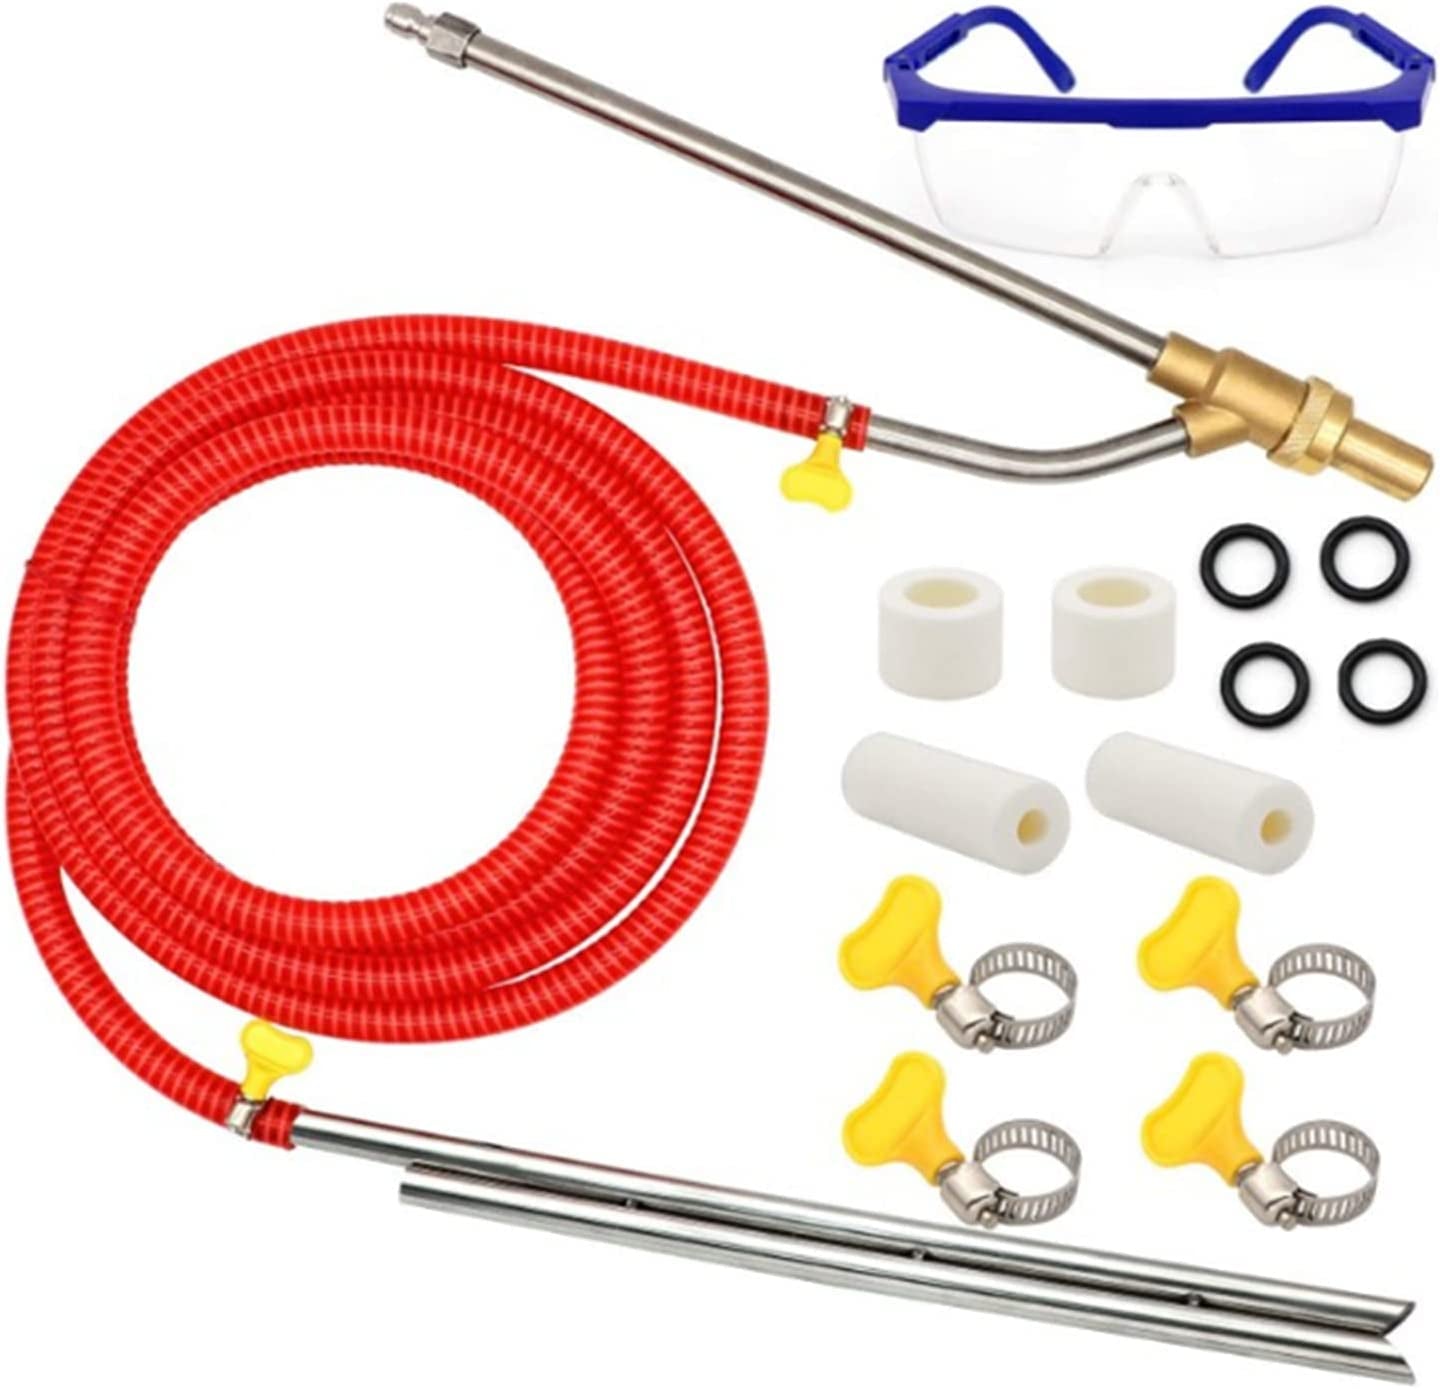 lehom, Lehom Pressure Washer Sandblasting Kit,Sand Blaster for Pressure Washer with Replacement Nozzle Tips,Protect Glasses,1/4 Inch Quick Disconnect 5000 PSI for Abrasive Cleaning